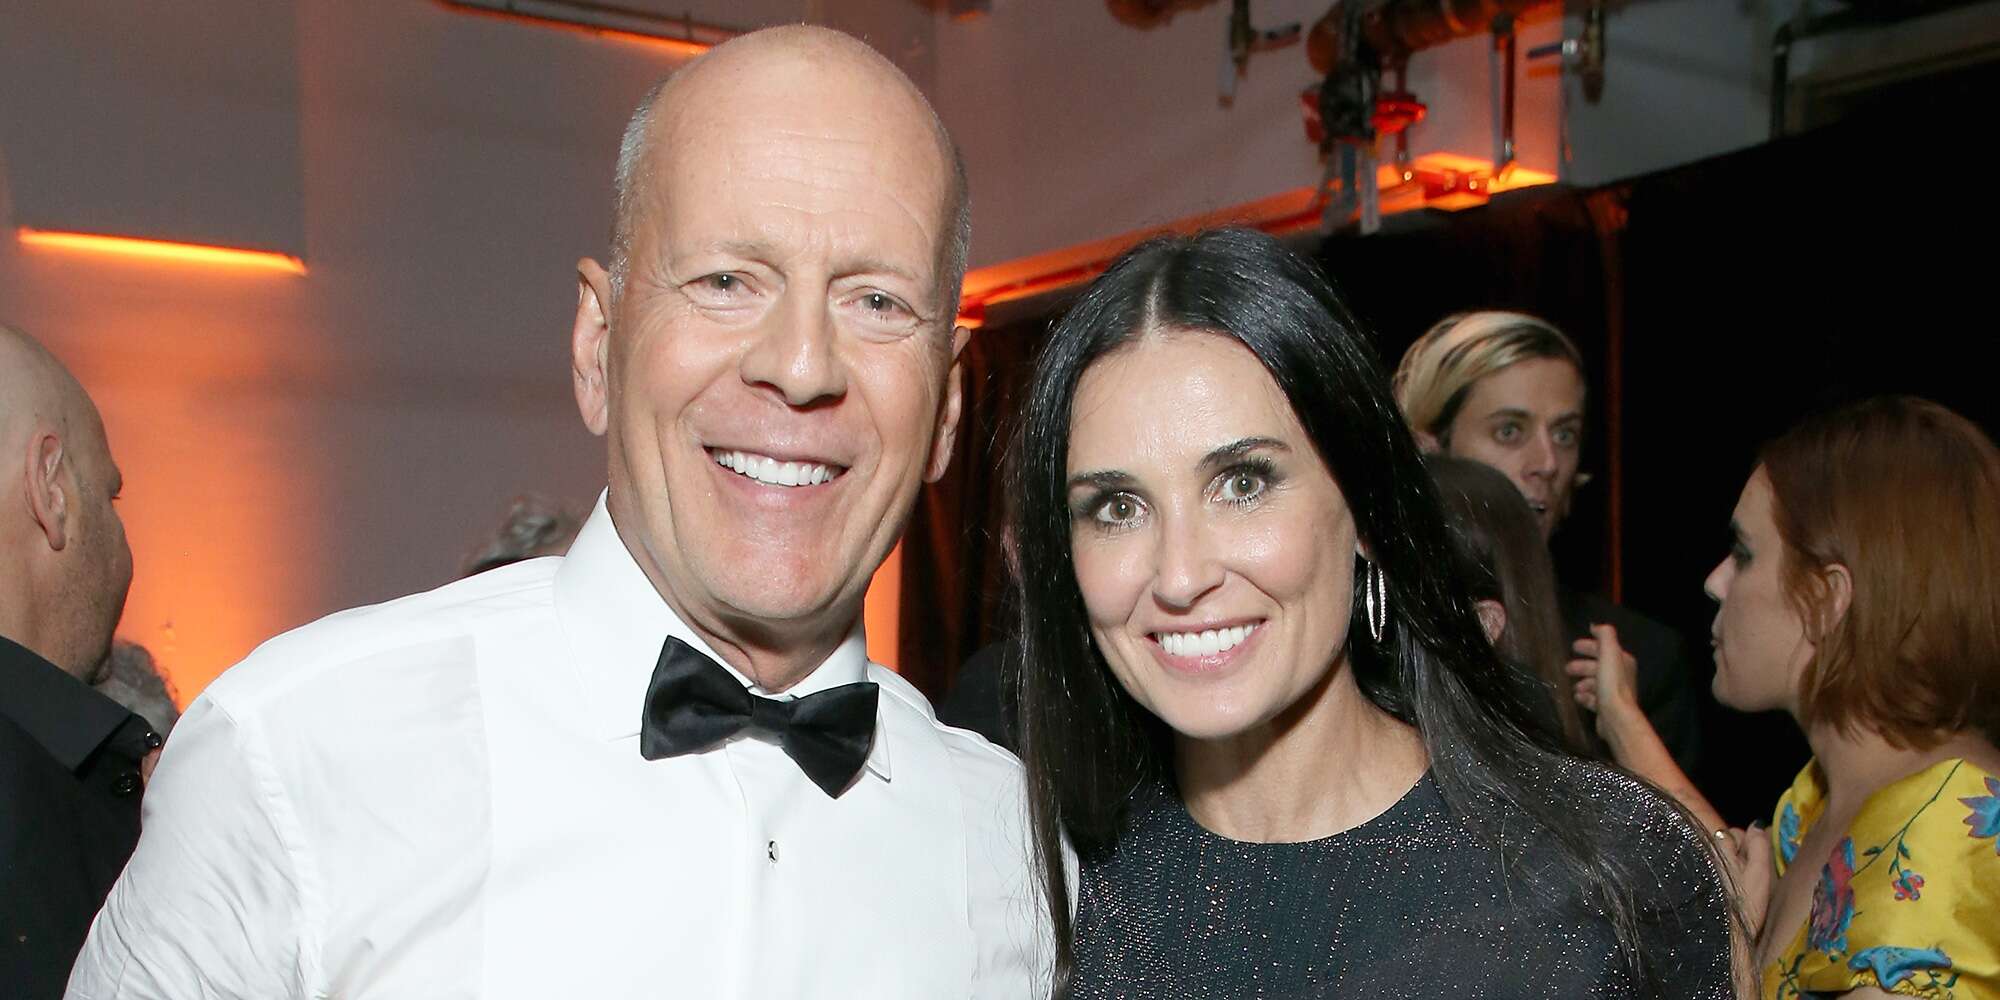 Demi Moore shares sweet video of Bruce Willis' family celebrating his birthday together